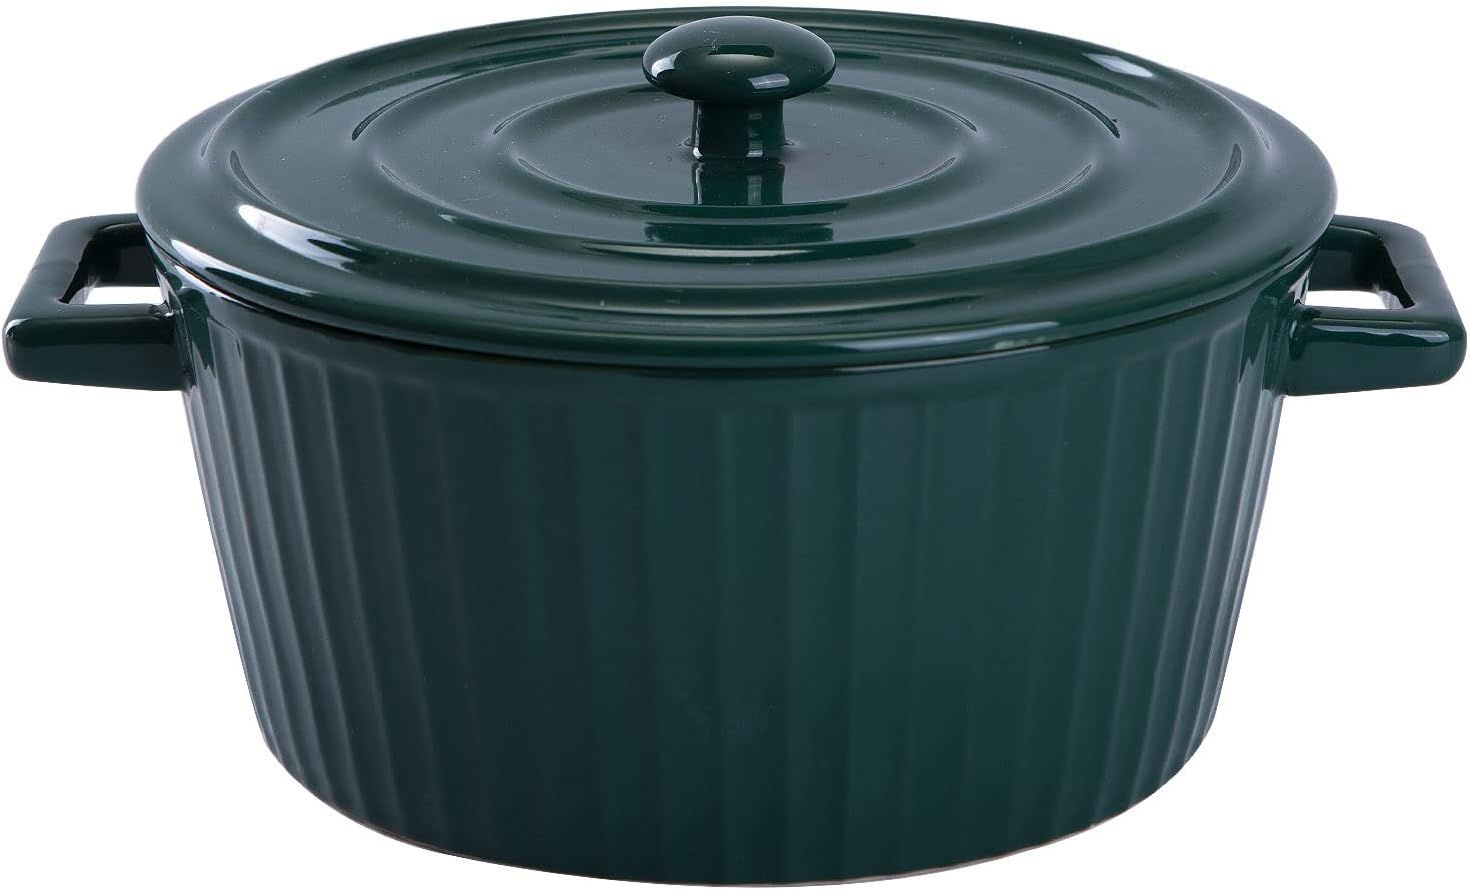 WHJY Green Colorful Ceramic Casserole Dish with Lid，1.2 Quart Ceramic Casserole Pan for Bakewar... | Amazon (US)